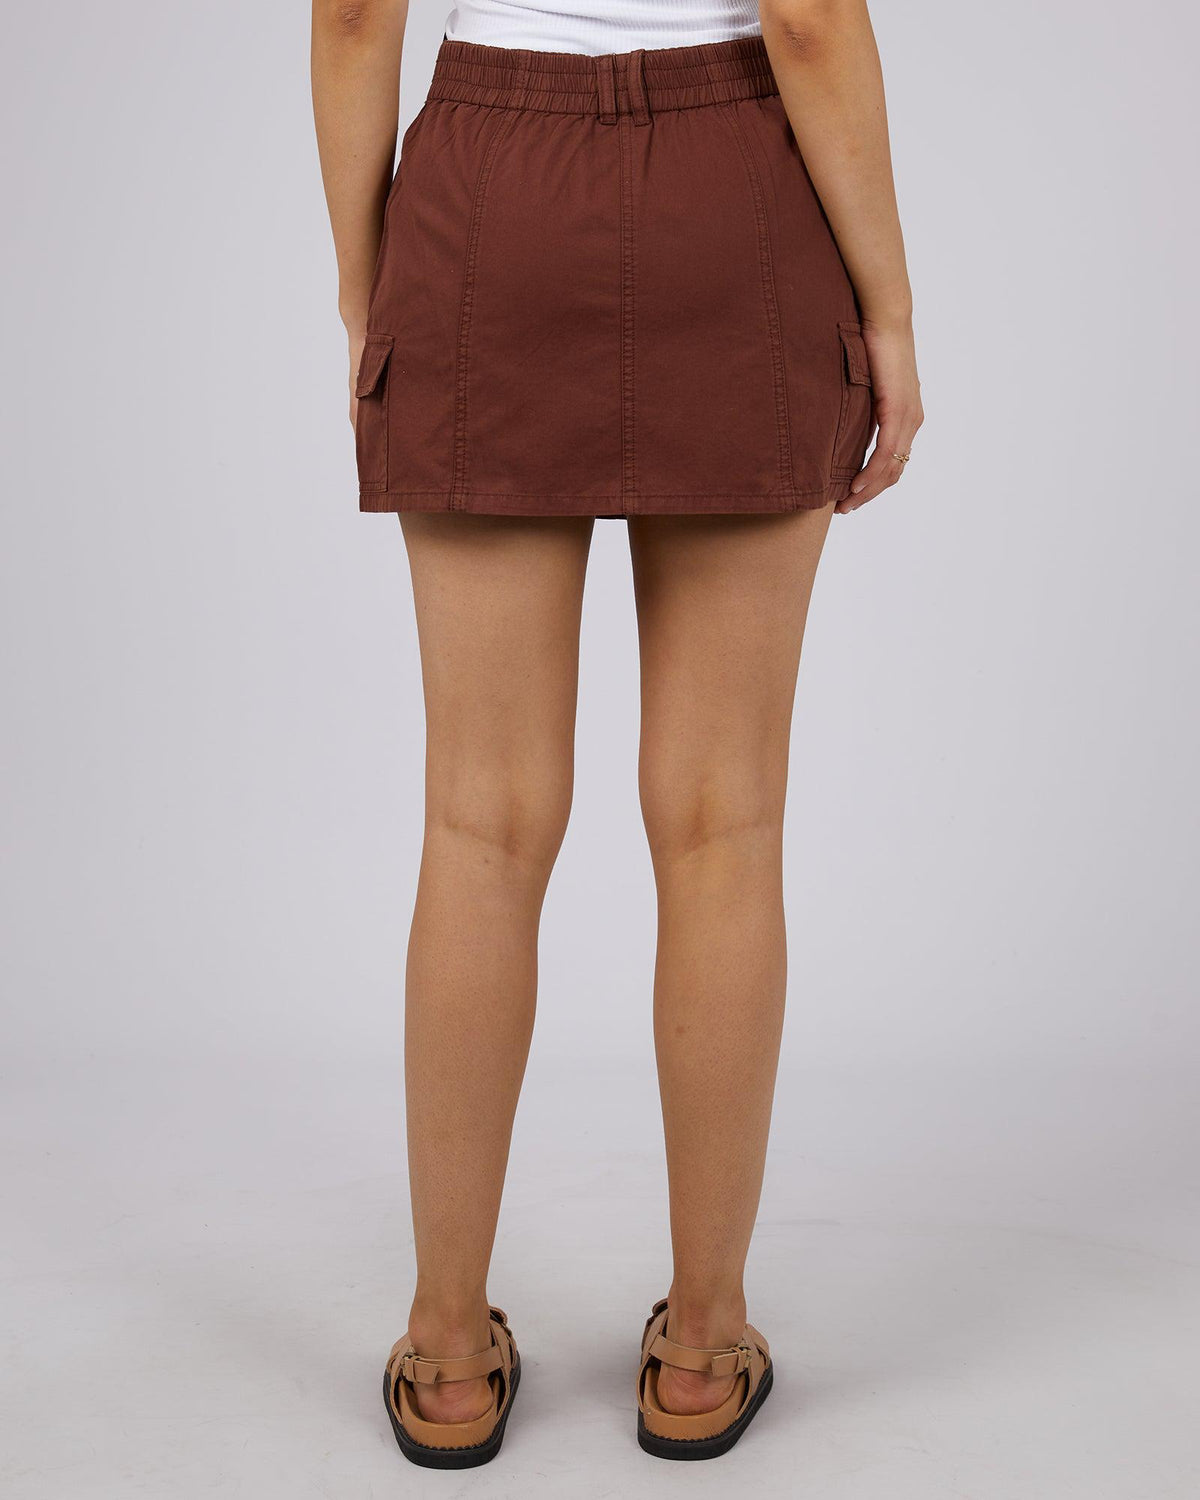 All About Eve-Luca Cargo Skirt Brown-Edge Clothing